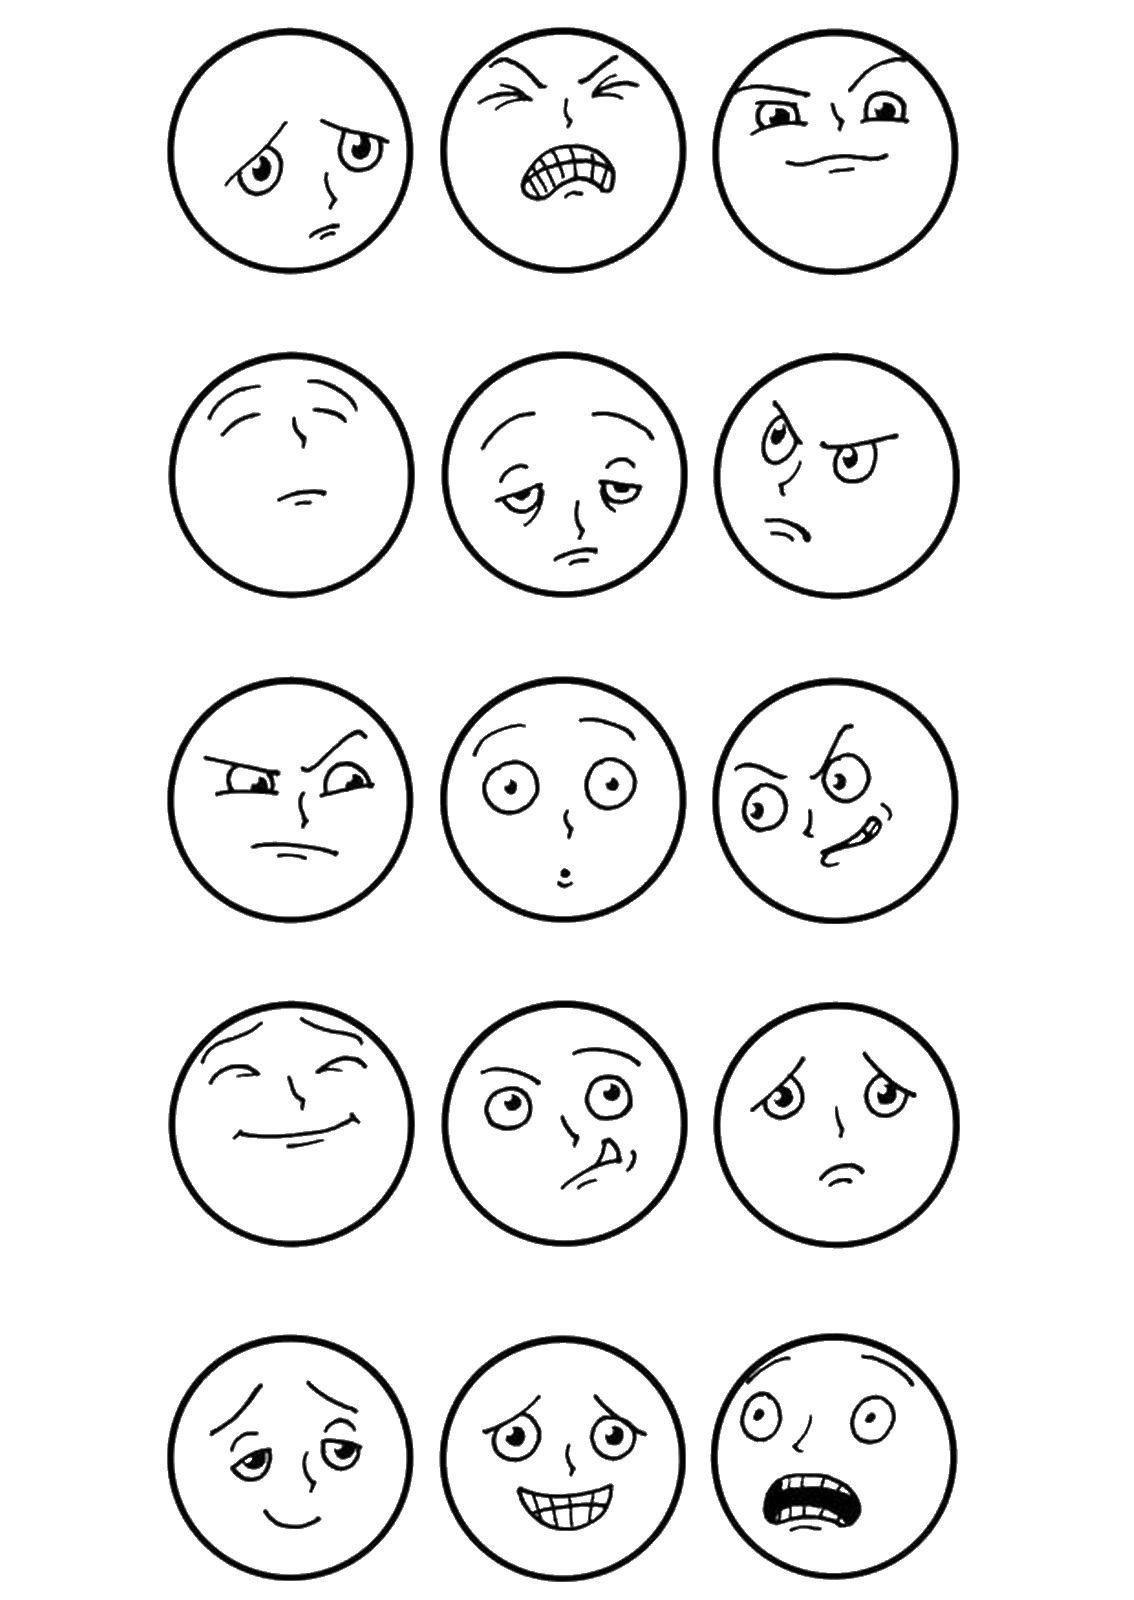 Top free printable emotions coloring pages online emotion faces facial expressions feelings and emotions